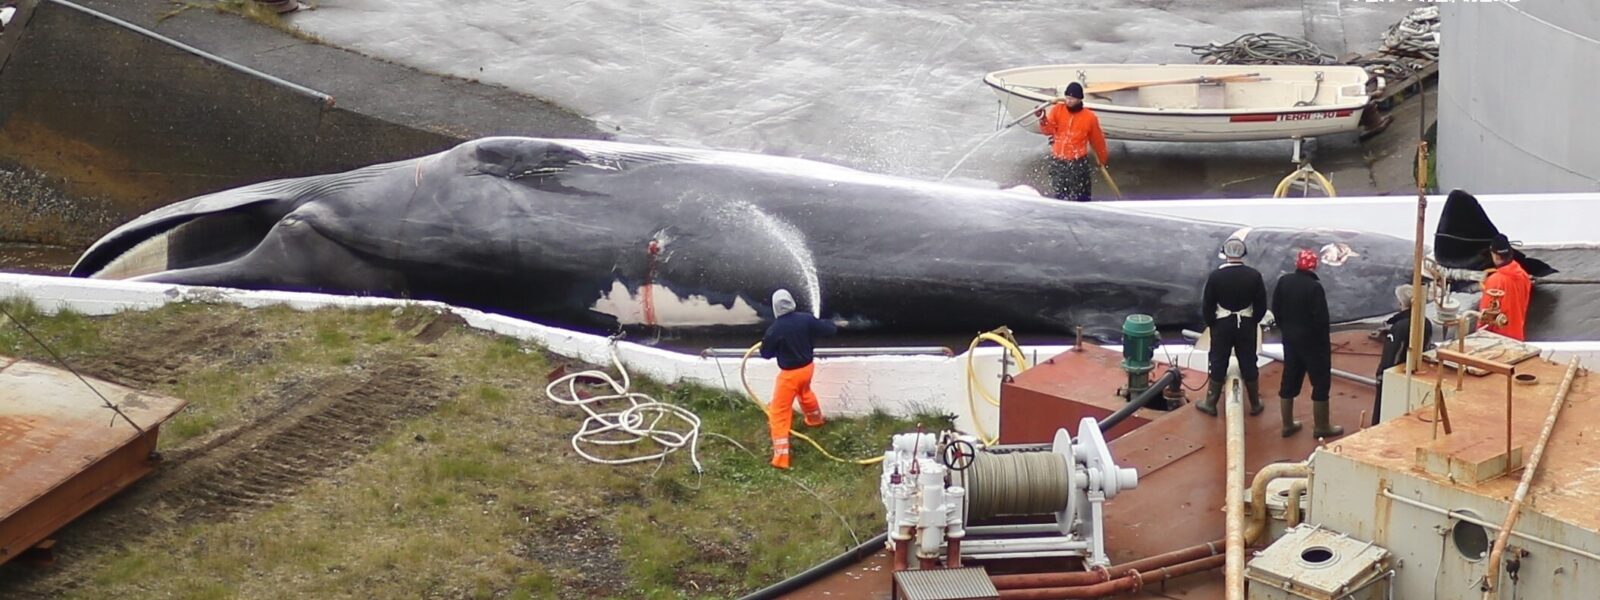 Fin Whale being processed in Iceland.  Photo Credit: Sea Shepherd Conservation Society